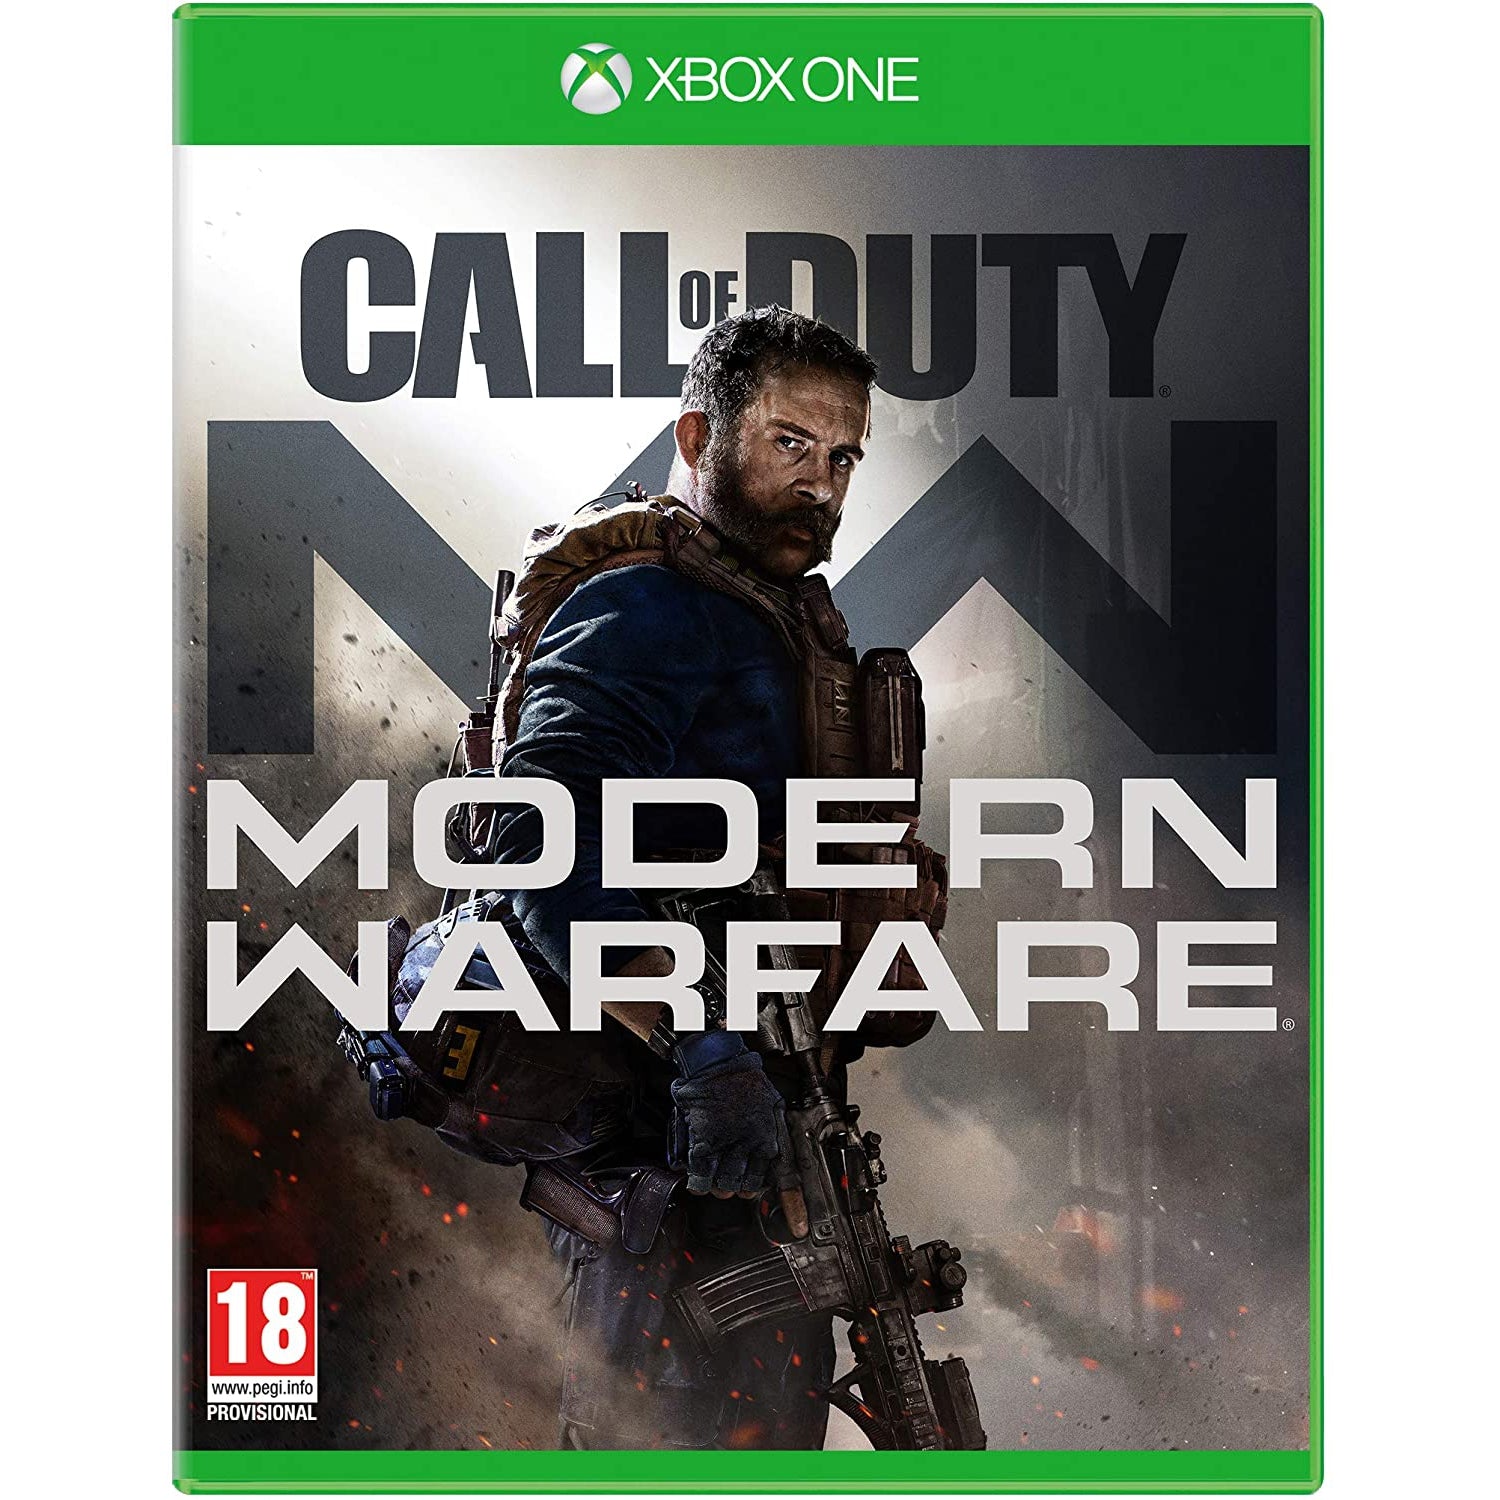 Call of Duty Modern Warfare (Xbox One) - Refurbished Excellent